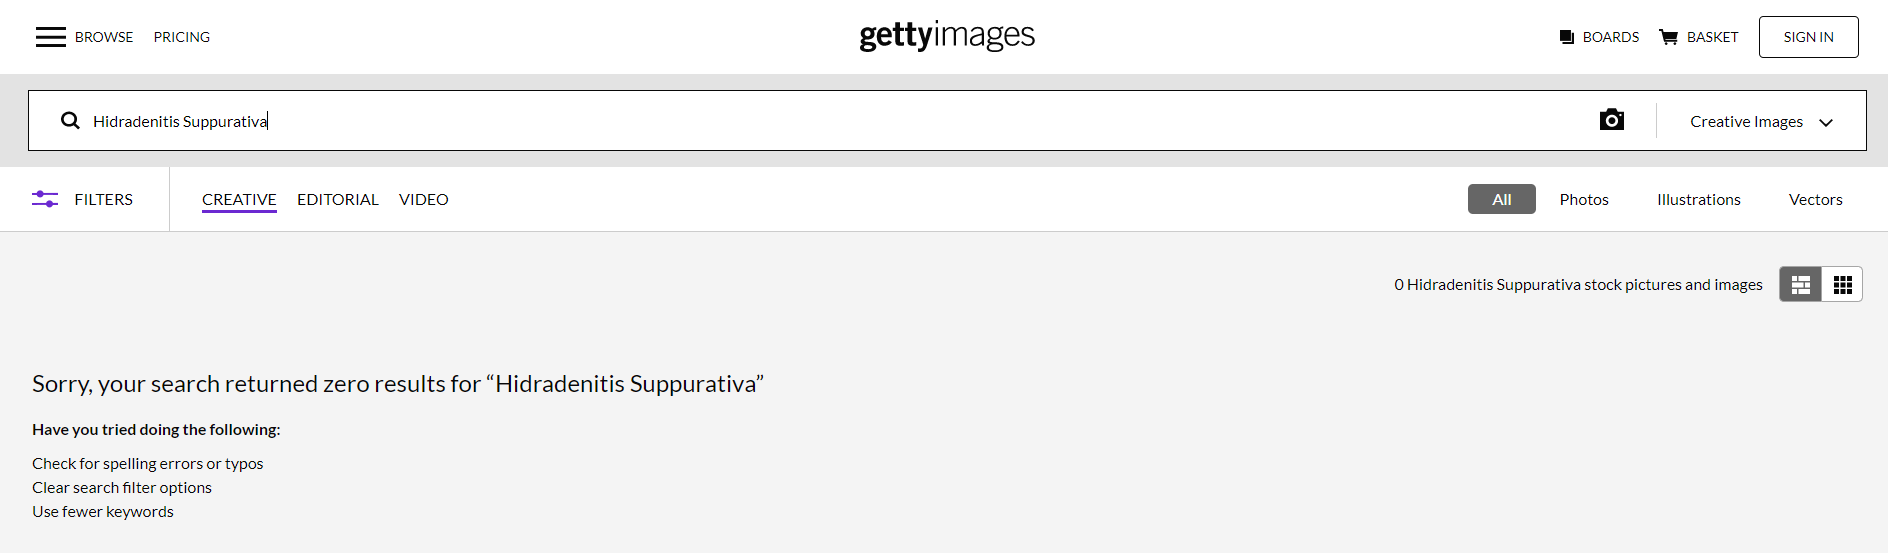 Getty Images shows zero results for hidradenitis suppurativa